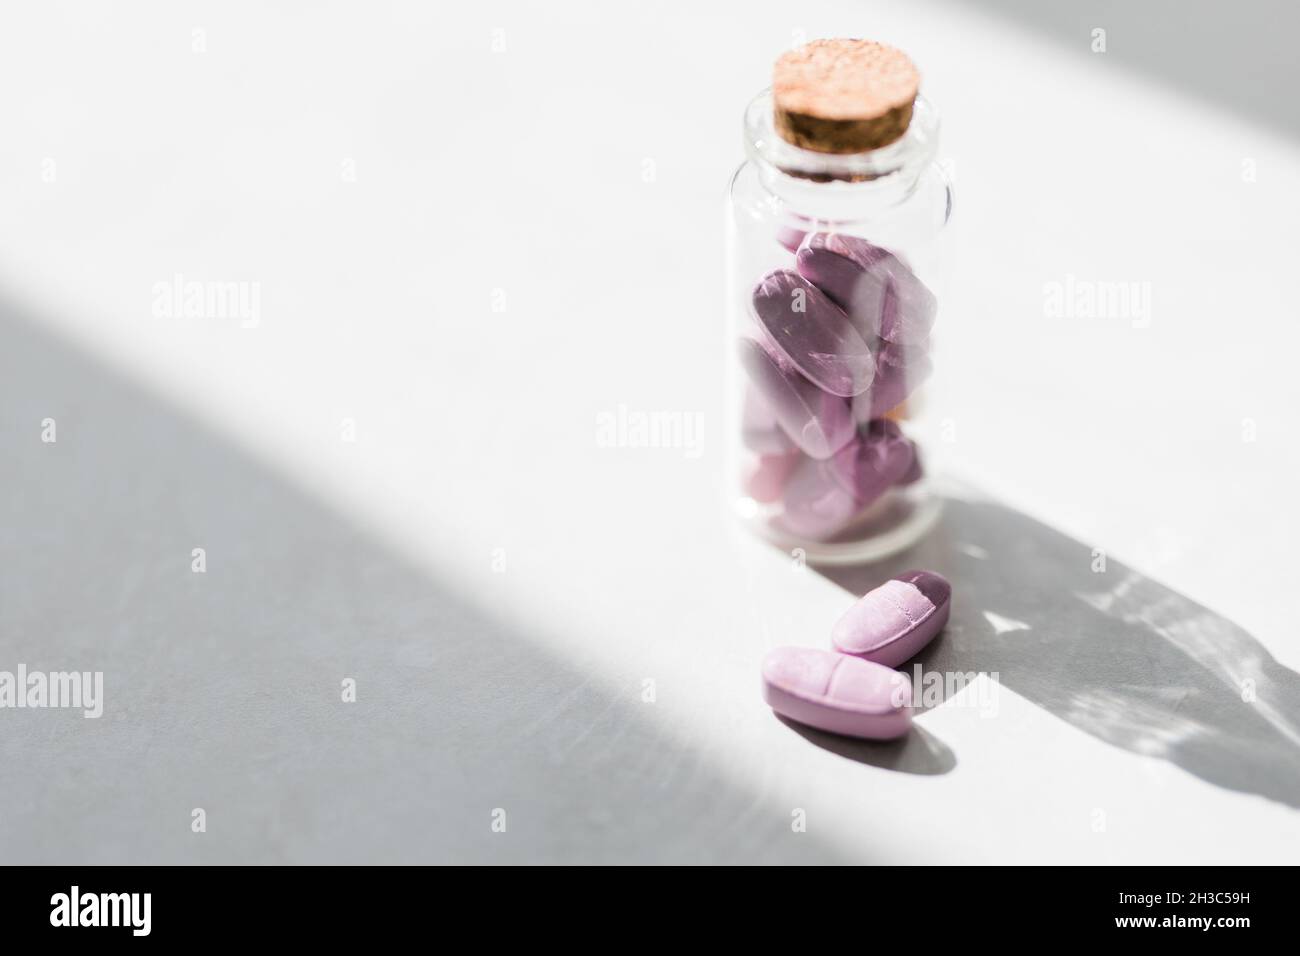 pink vitamin pills in a glass jar jn white table. Conservative medicine. Health care concept. Stock Photo